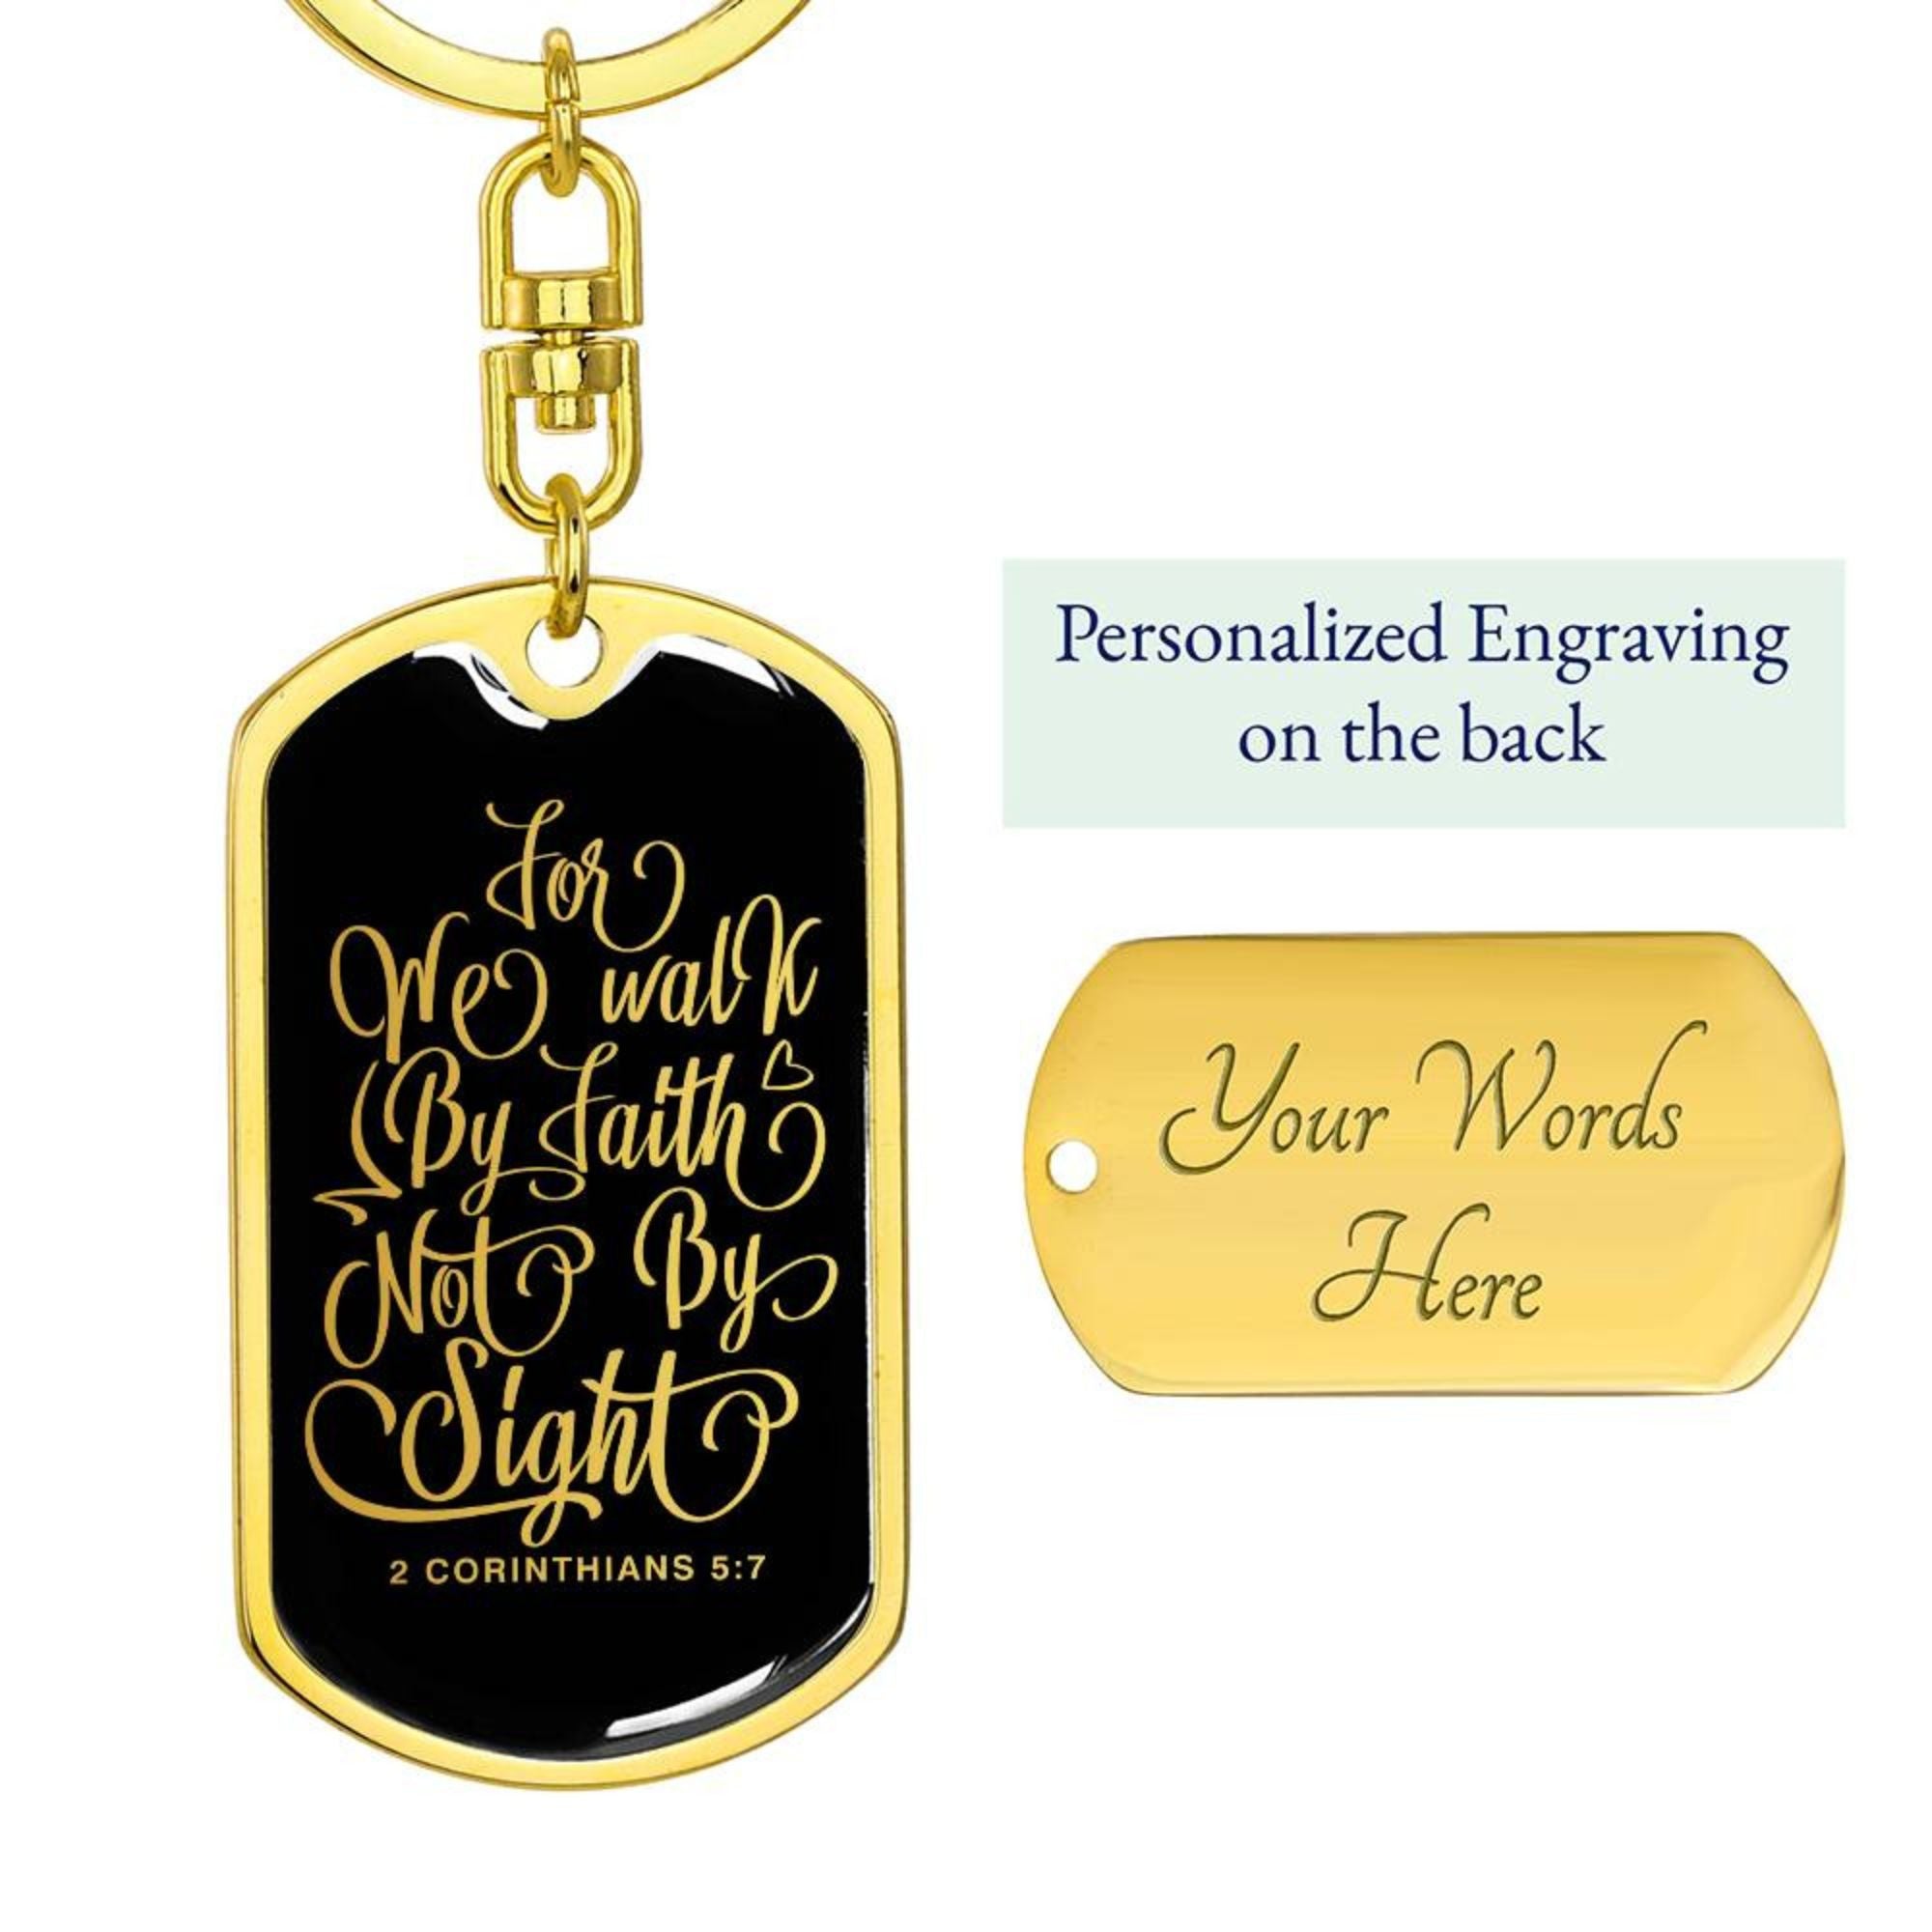 We Walk By Faith - Gold Dog Tag with Swivel Keychain Engraving: Yes Jesus Passion Apparel